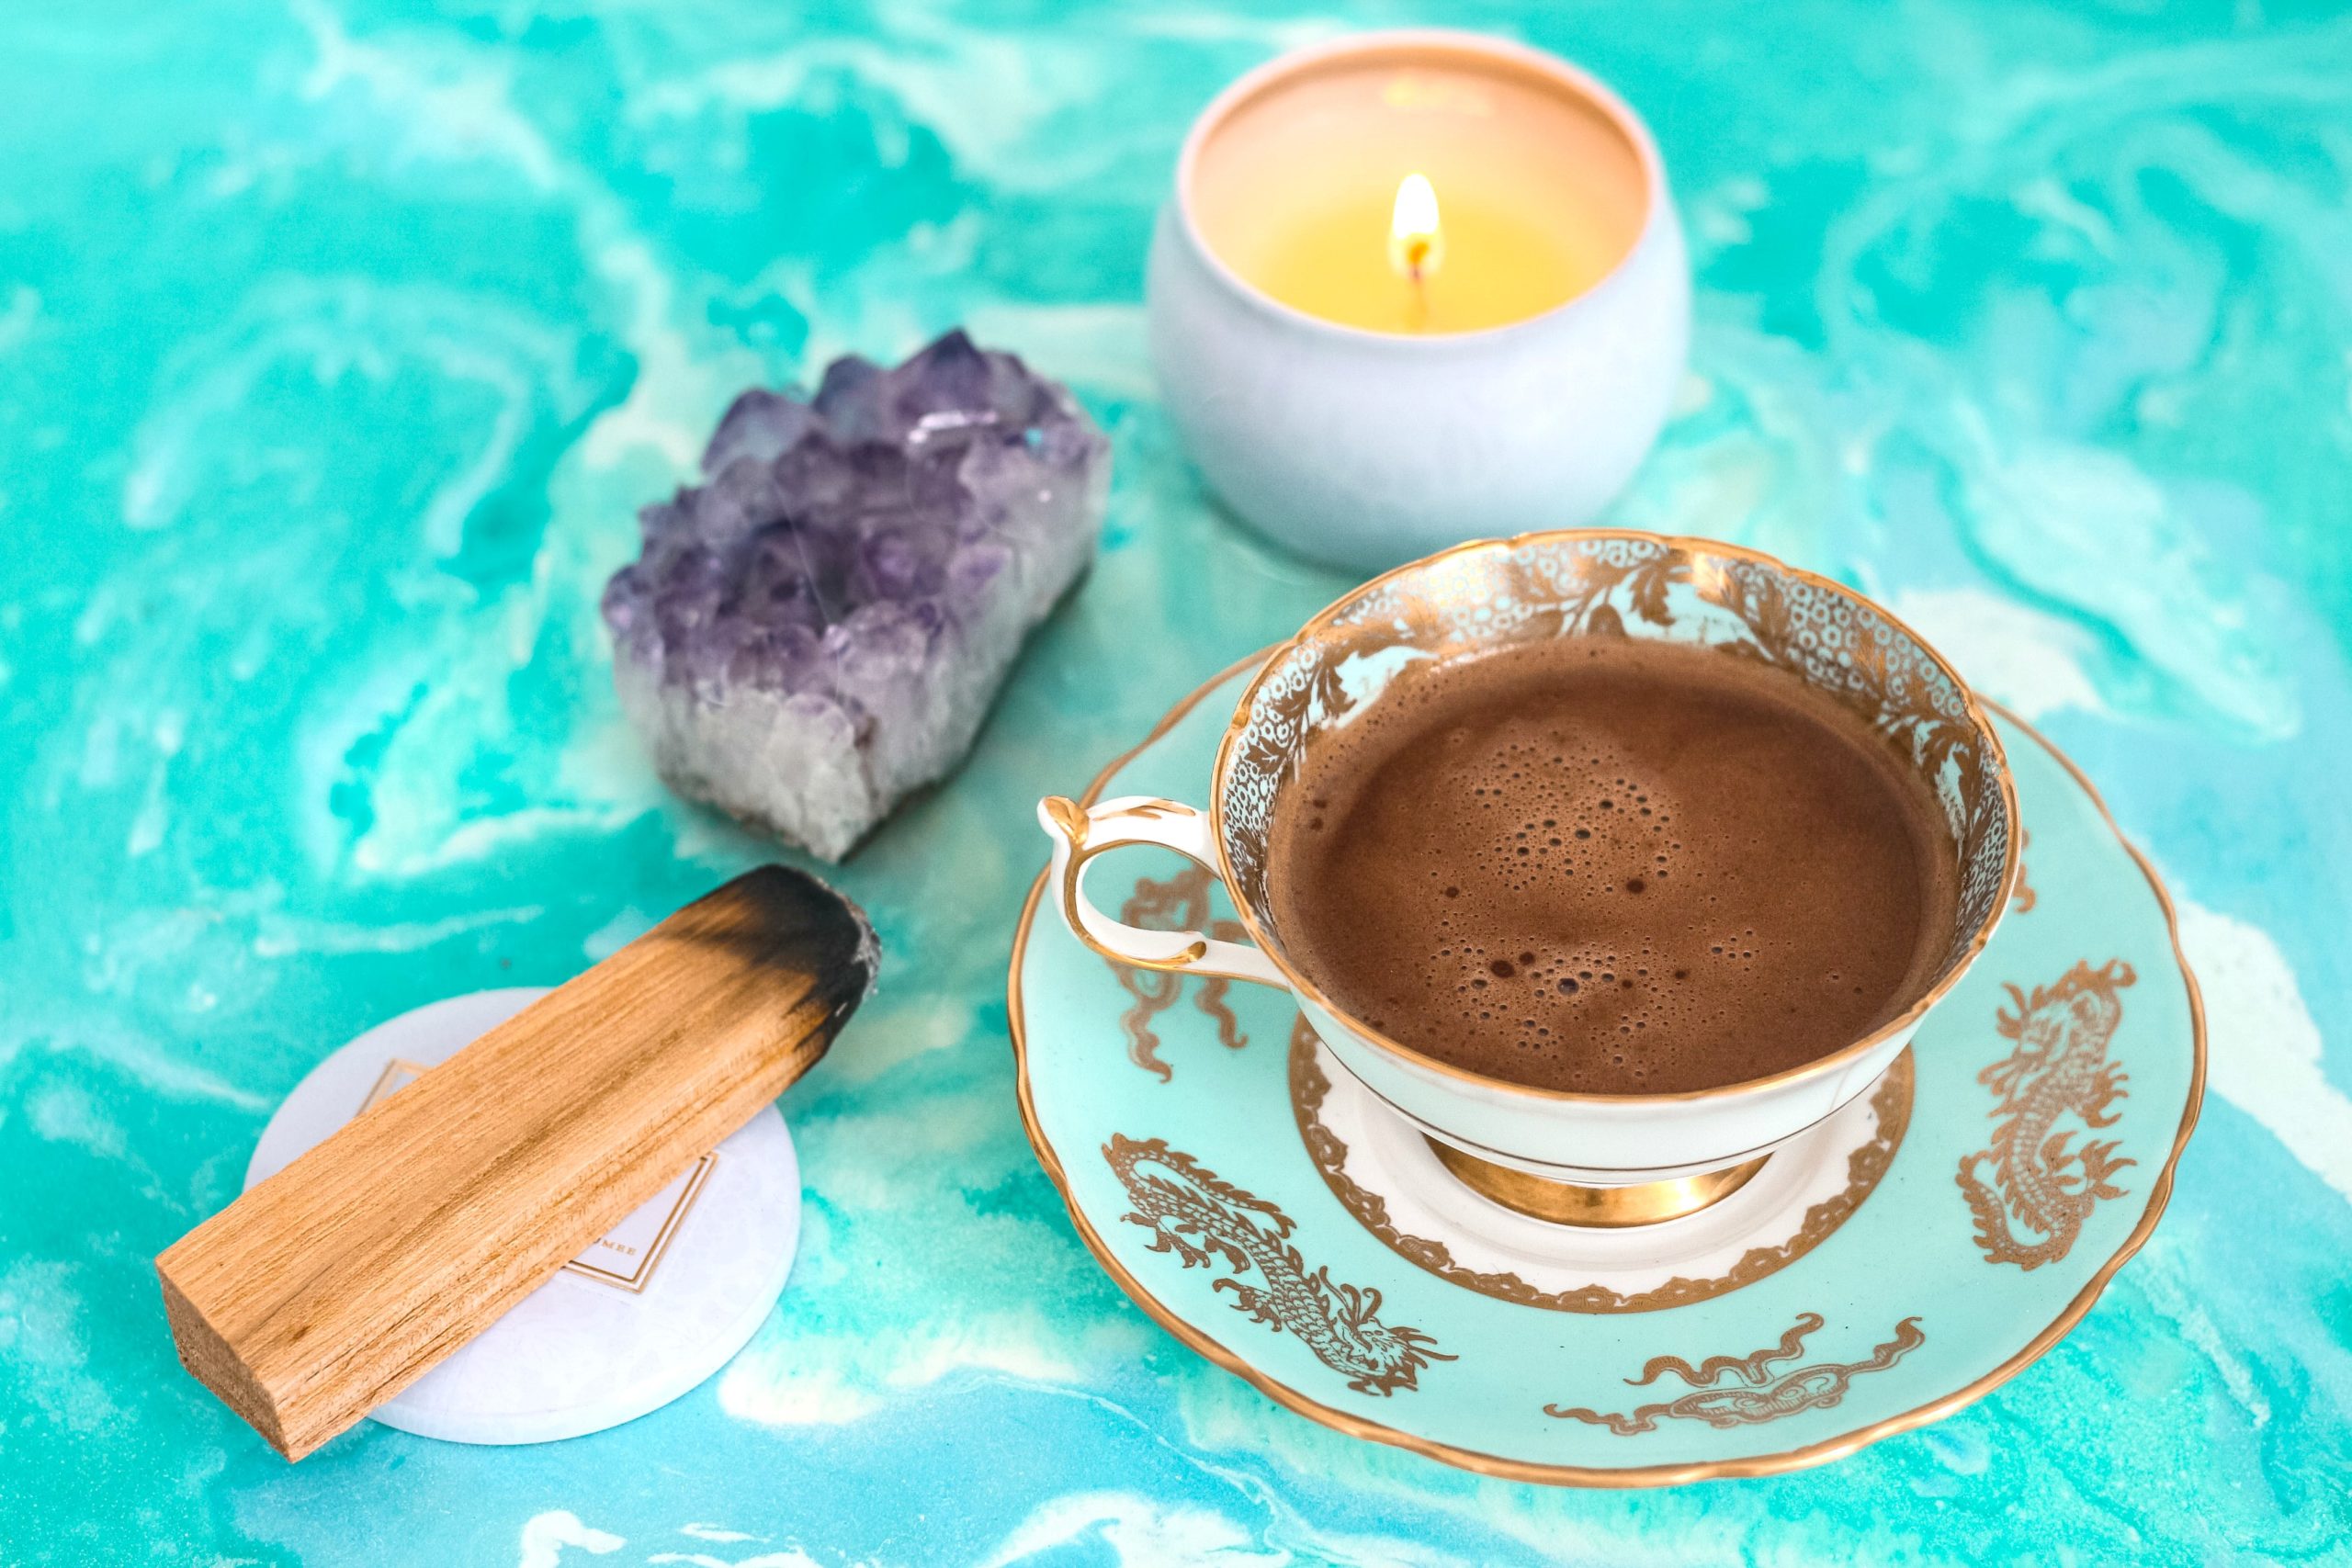  <img src="hot chocolate.jpg" alt="hot chocolate and candle on blue flatlay"/> 